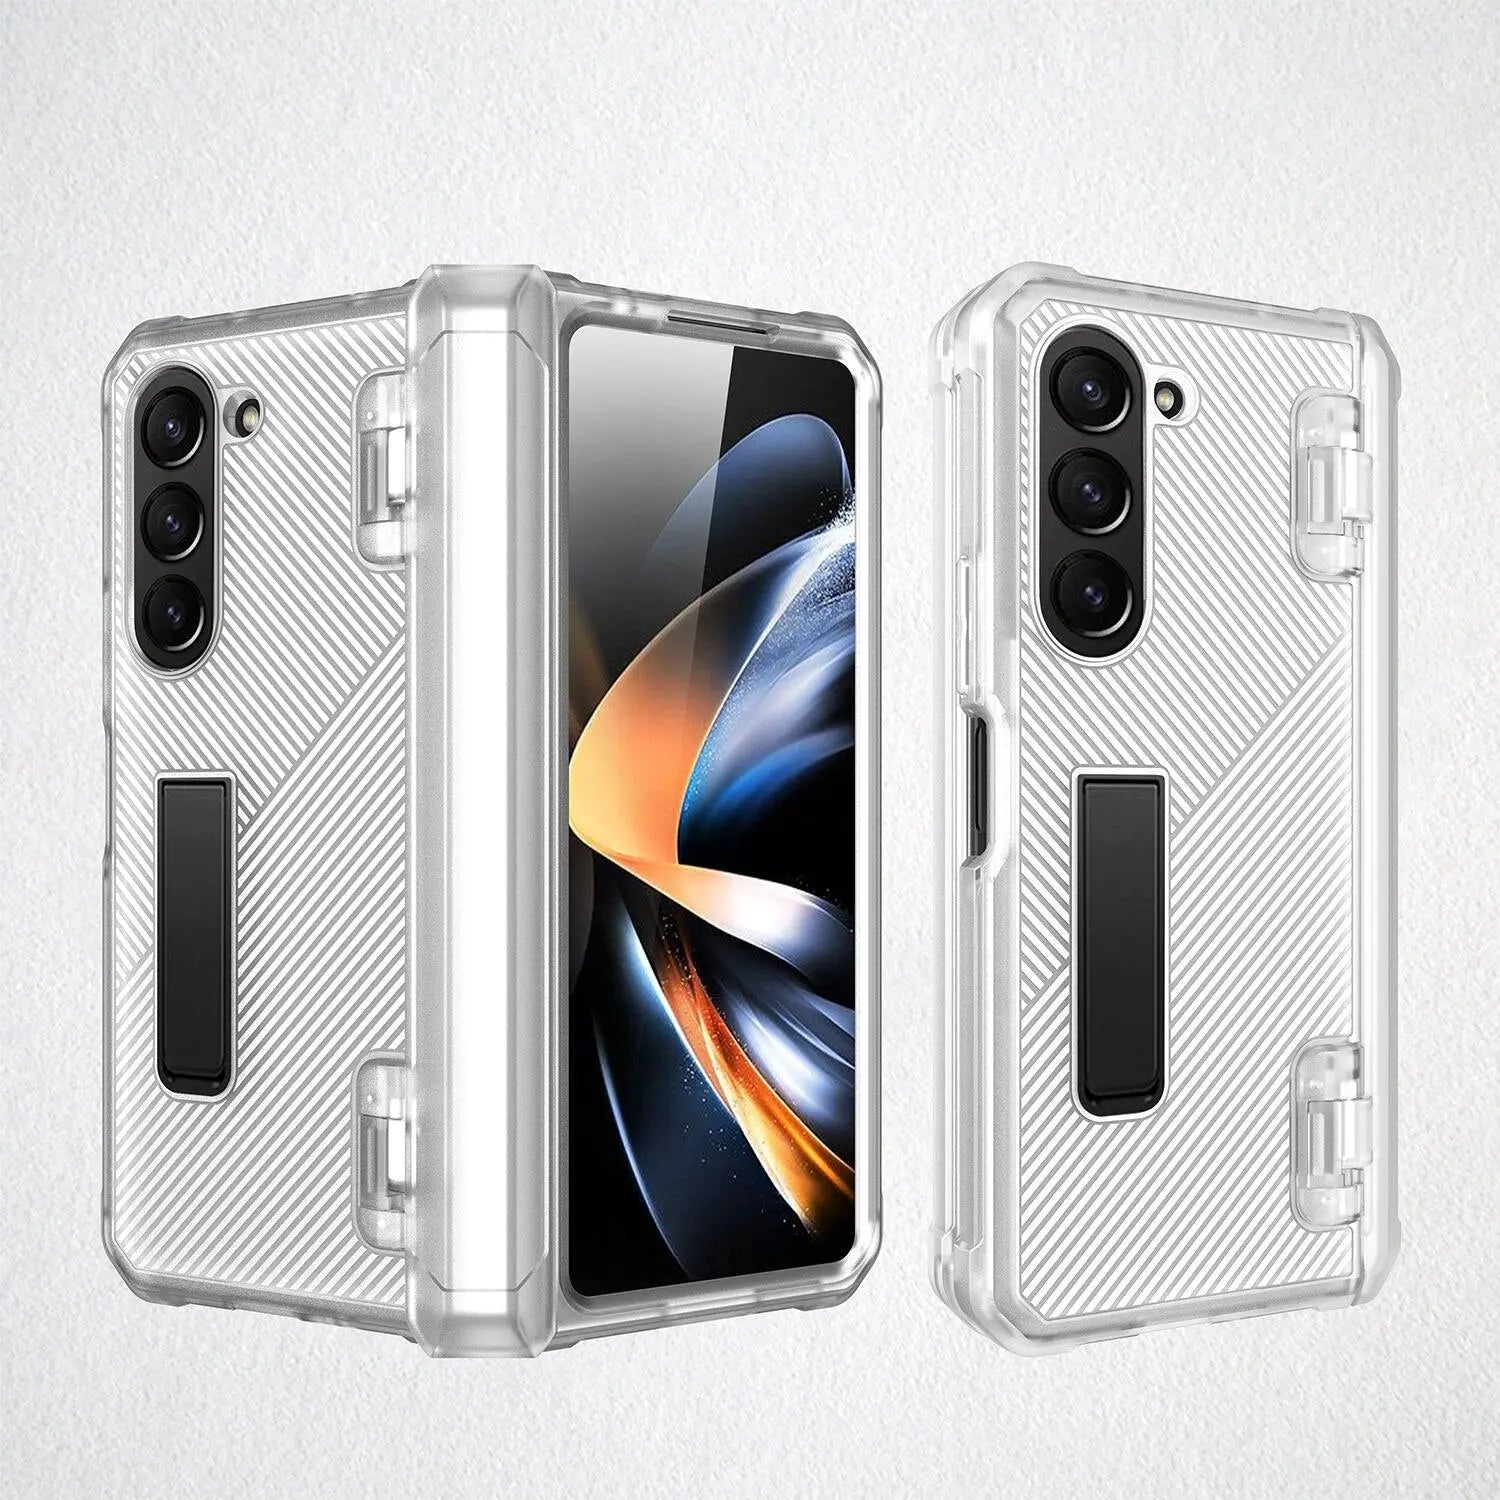 Shield360 Tempered Glass Phone Case For Samsung Galaxy Z Fold 5 Pinnacle Luxuries